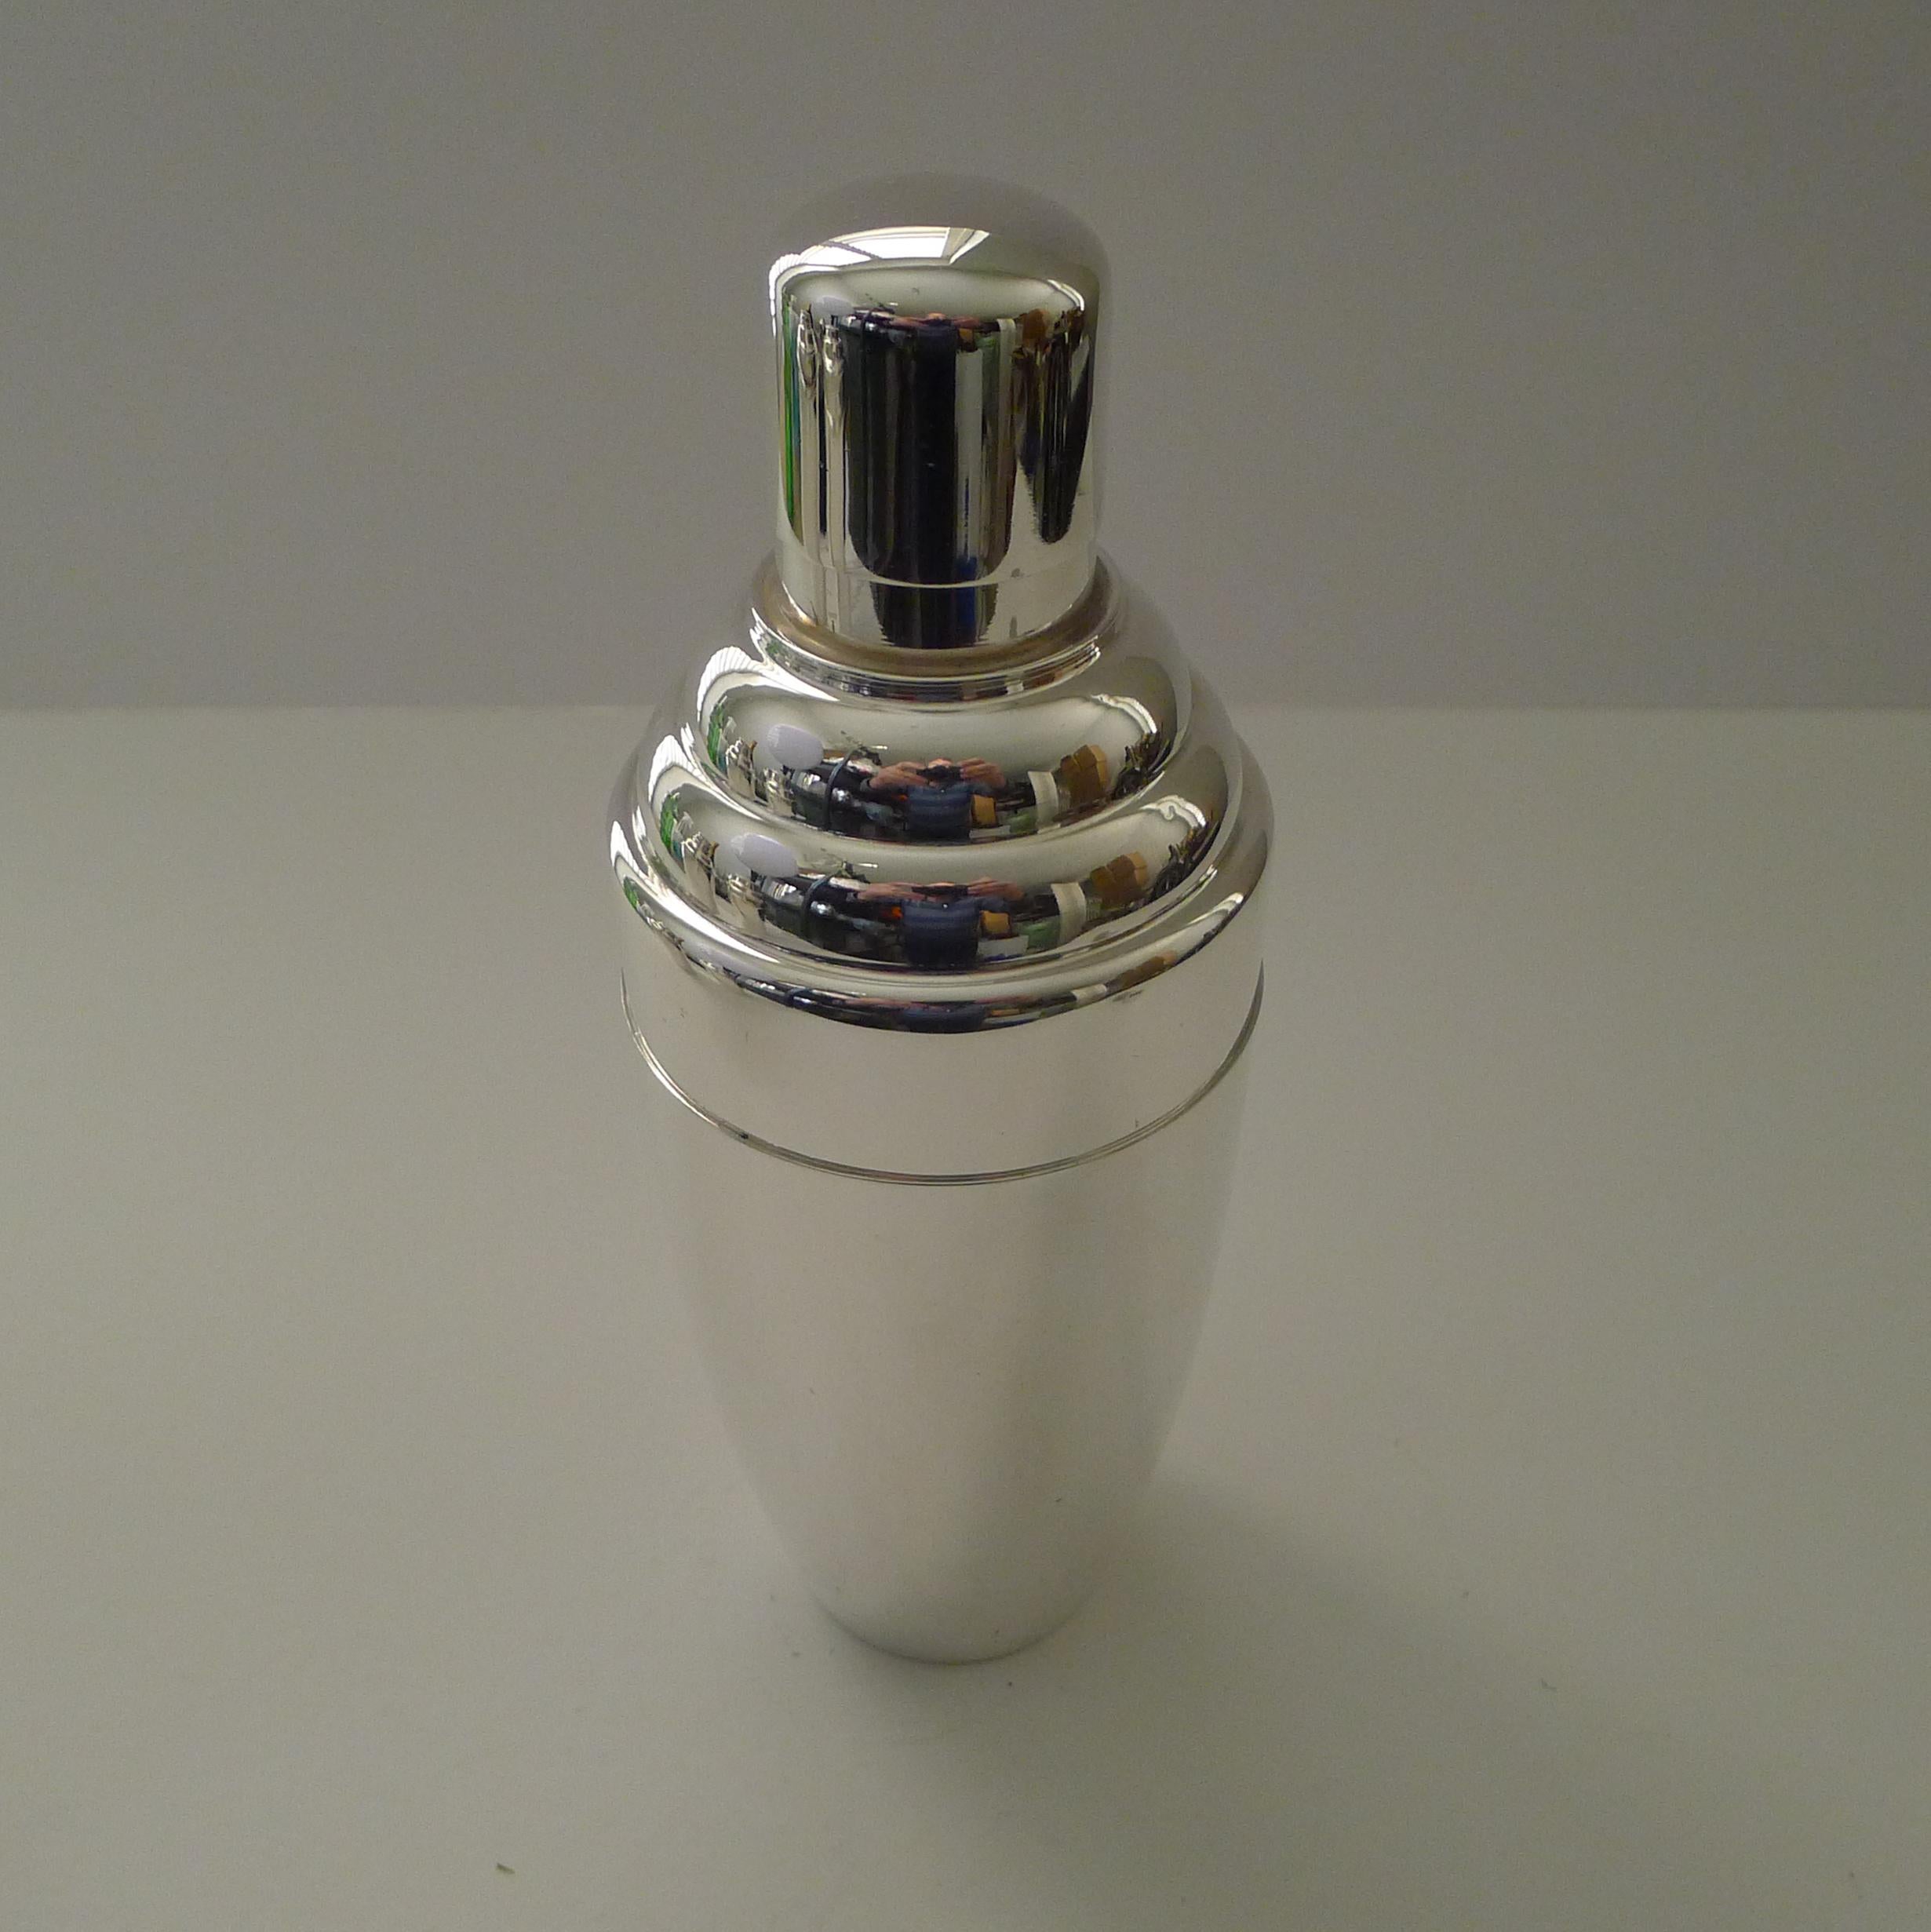 Smart Art Deco Cocktail Shaker by Gaskell & Chambers, c.1940 In Good Condition For Sale In Bath, GB